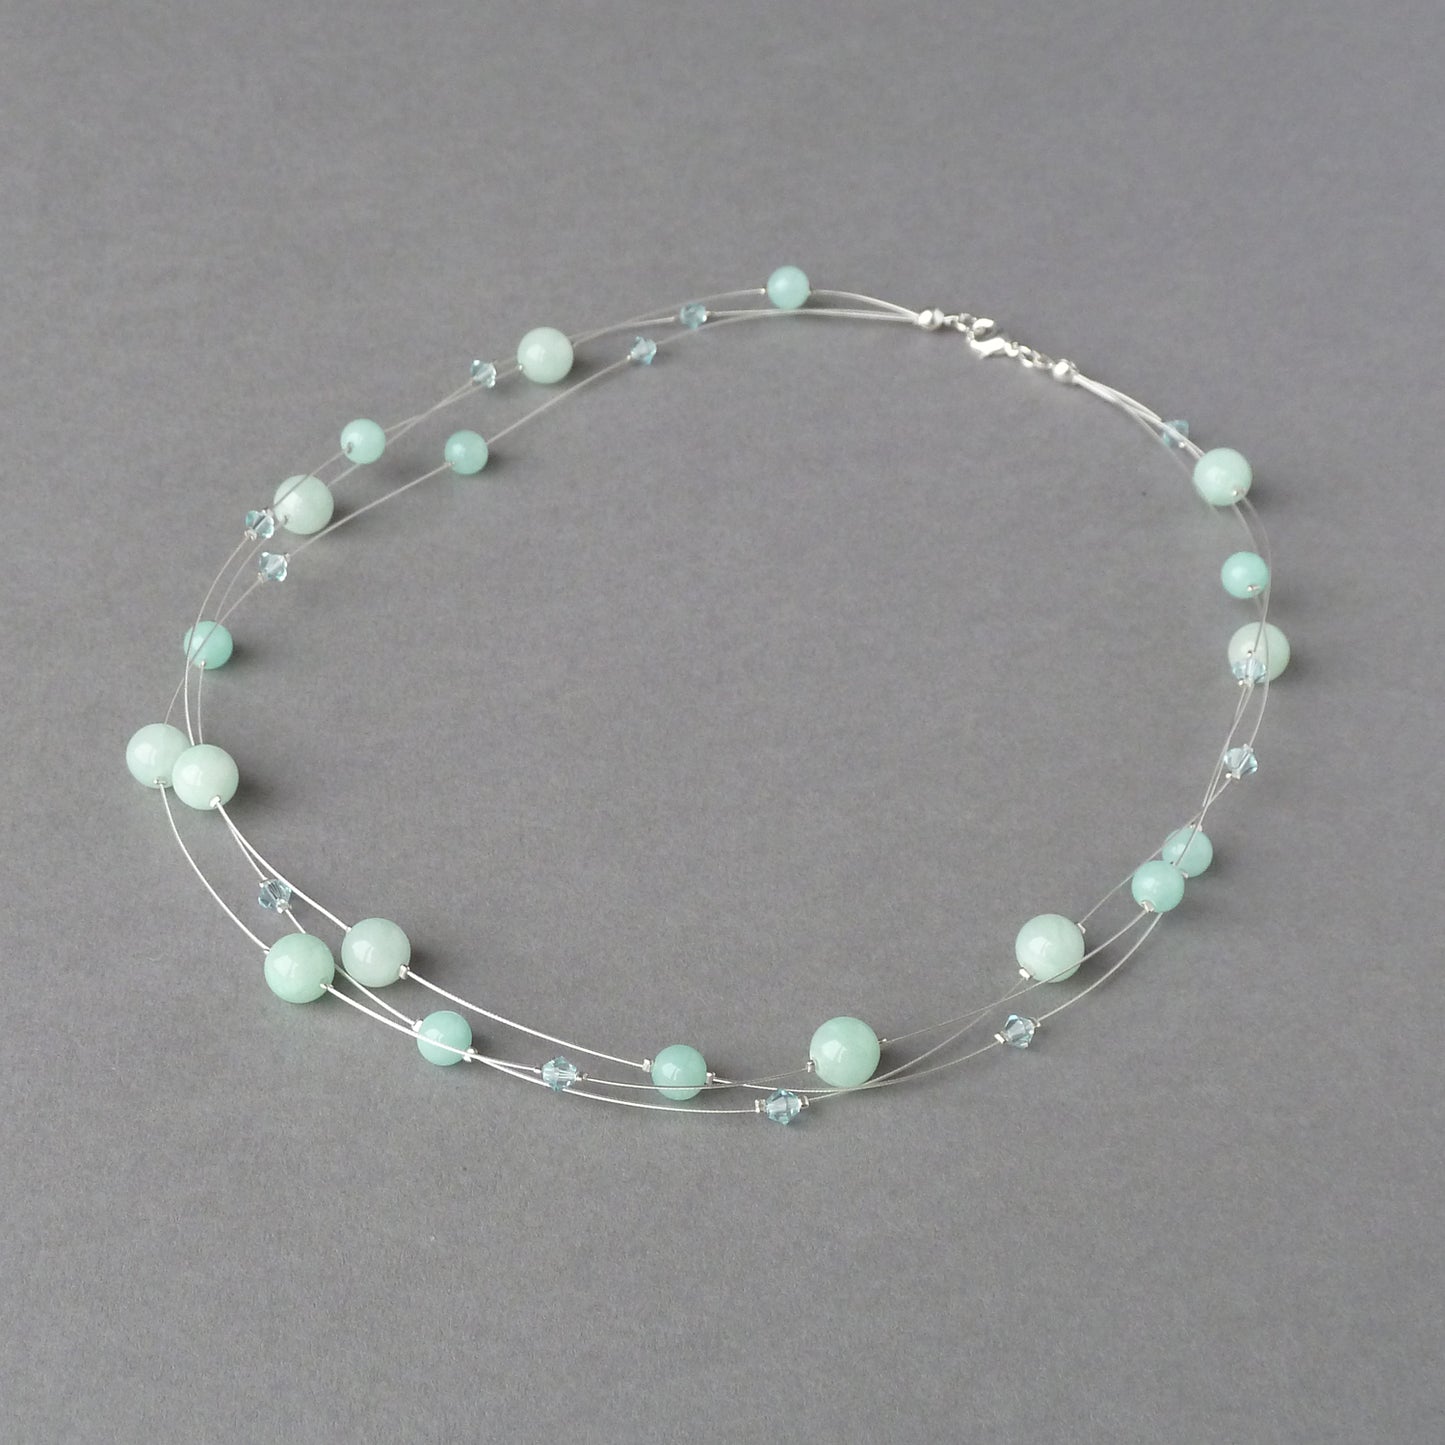 Dainty pastel green necklace